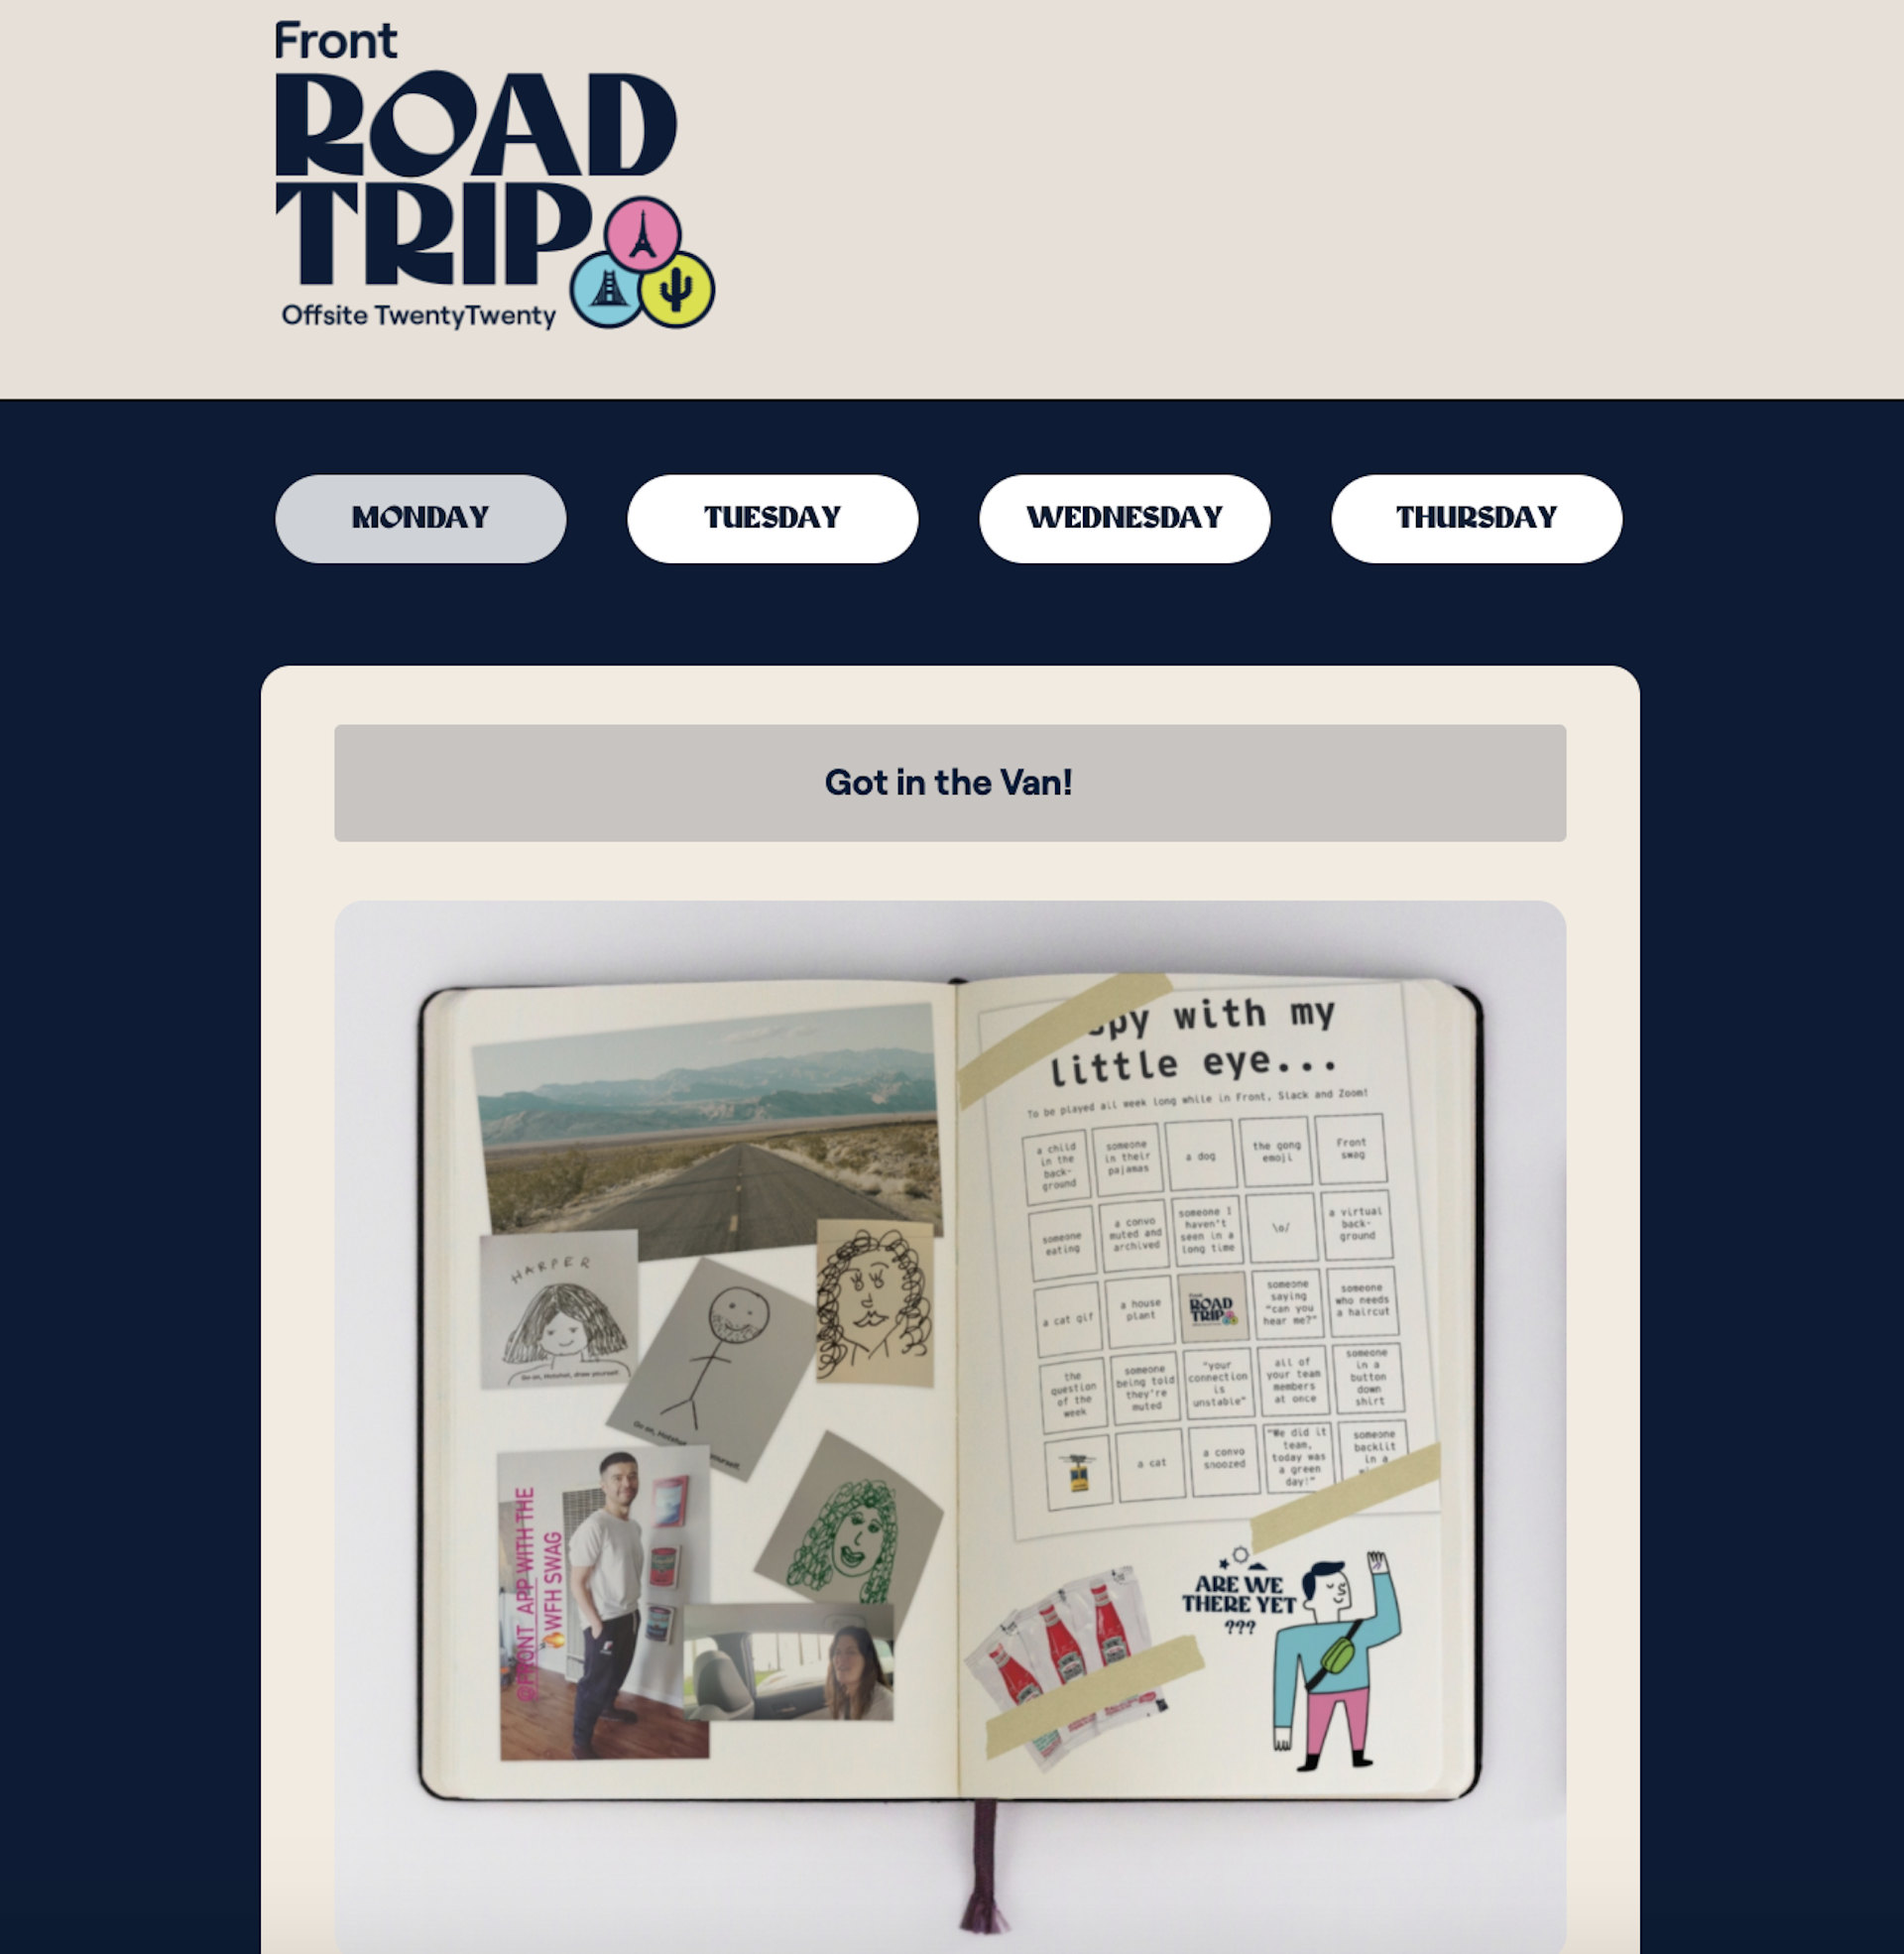 Example of a virtual road trip from Front